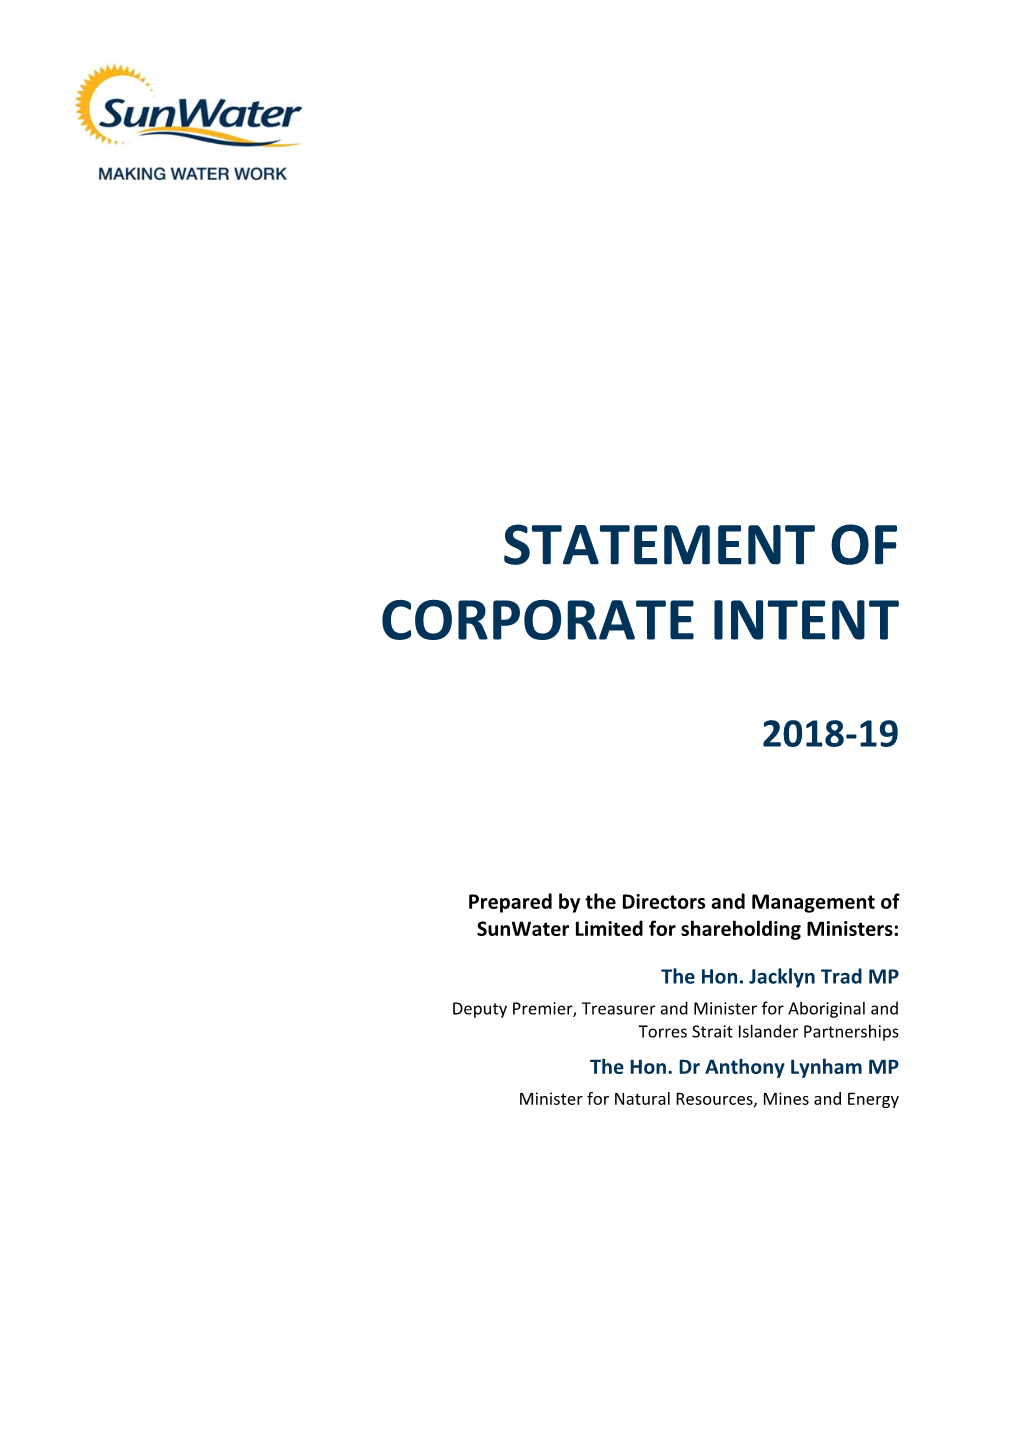 Statement of Corporate Intent